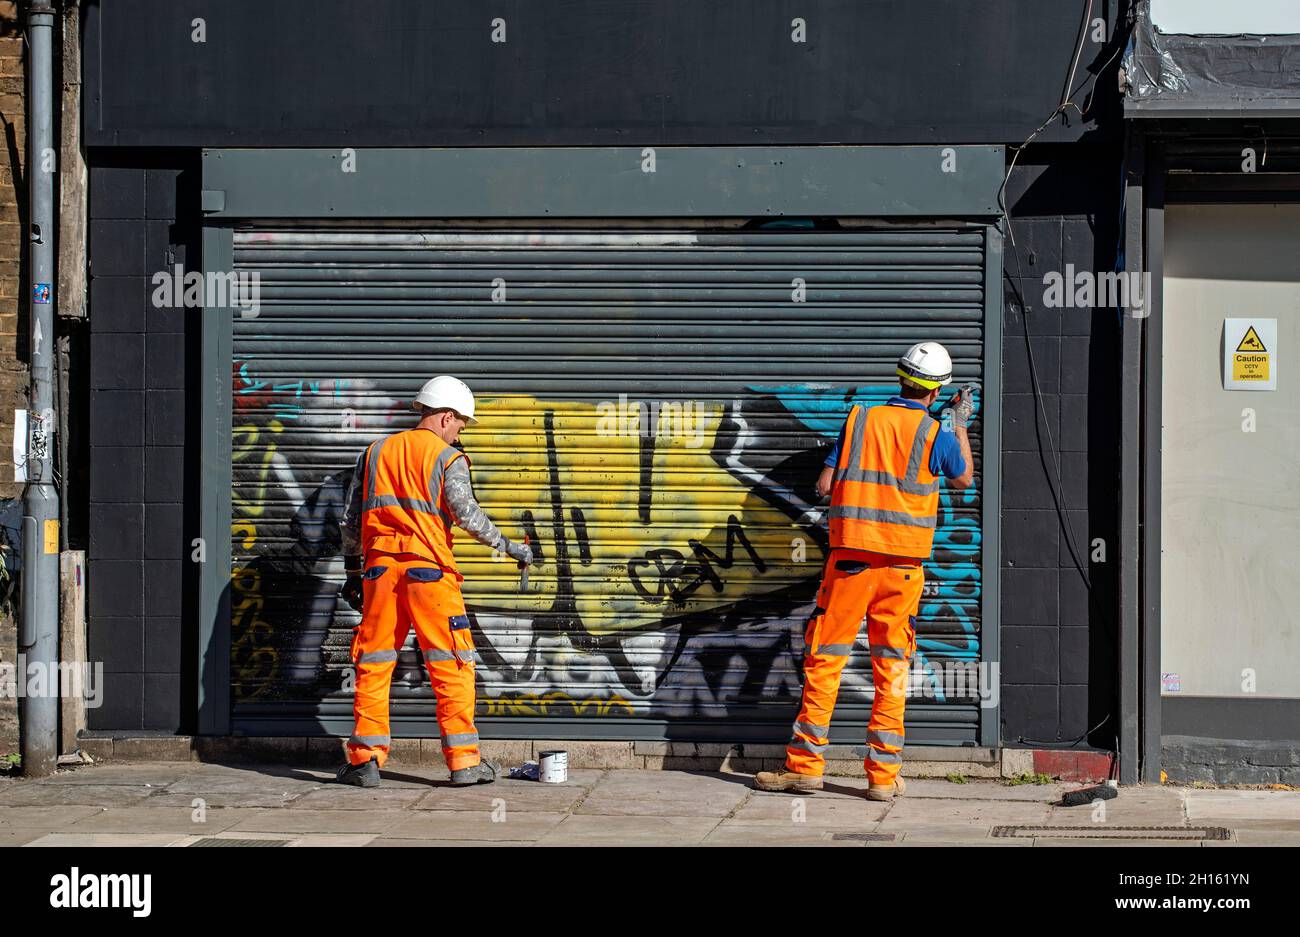 Two men workman wearing high visibility vests removing graffiti from shop shutter by painting over it London Borough of Camden England Britain UK Stock Photo